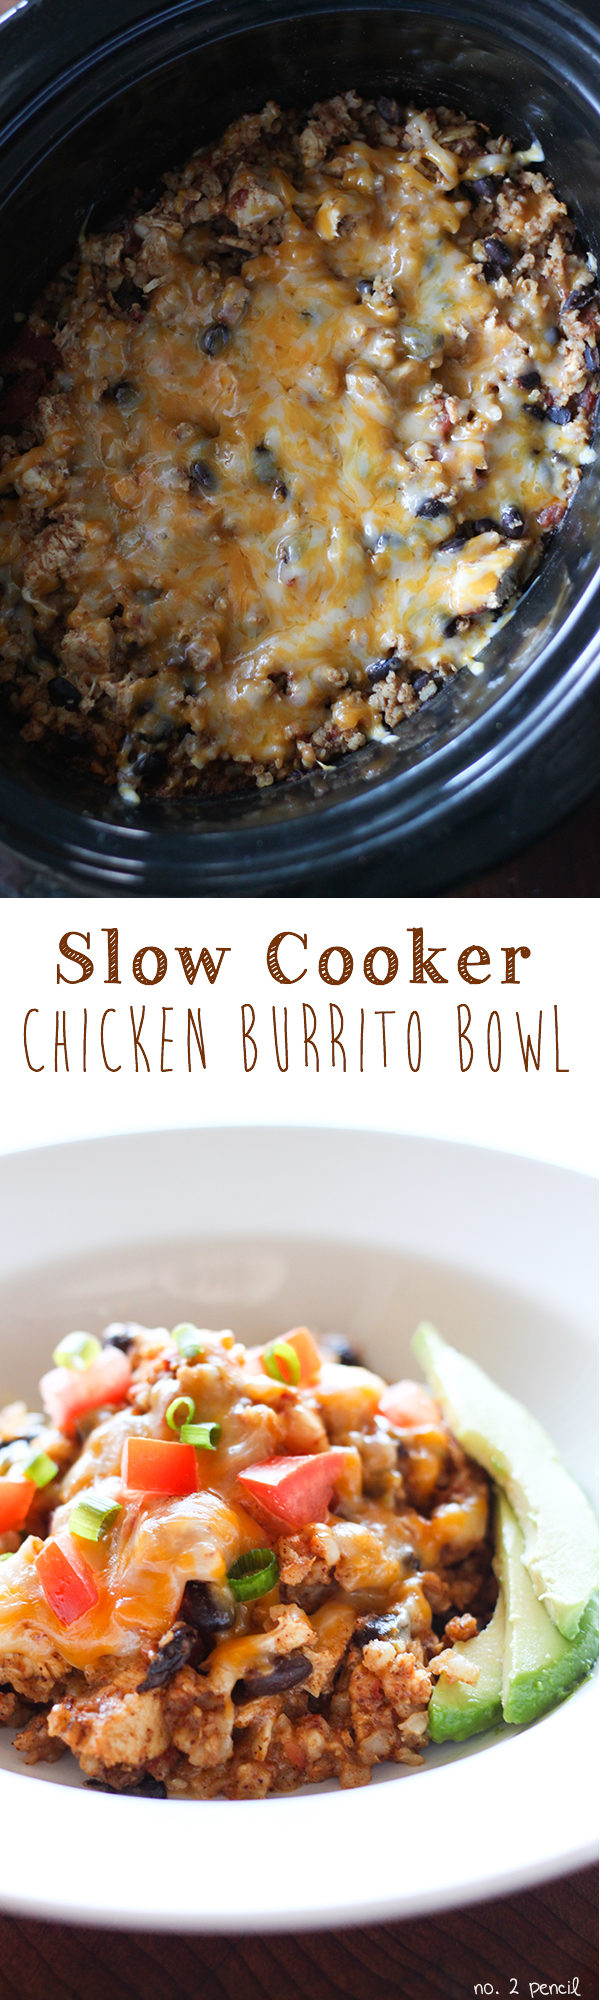 Slow Cooker Chicken Burrito Bowl - tender chicken, black beans and brown rice in an easy slow cooker recipe.